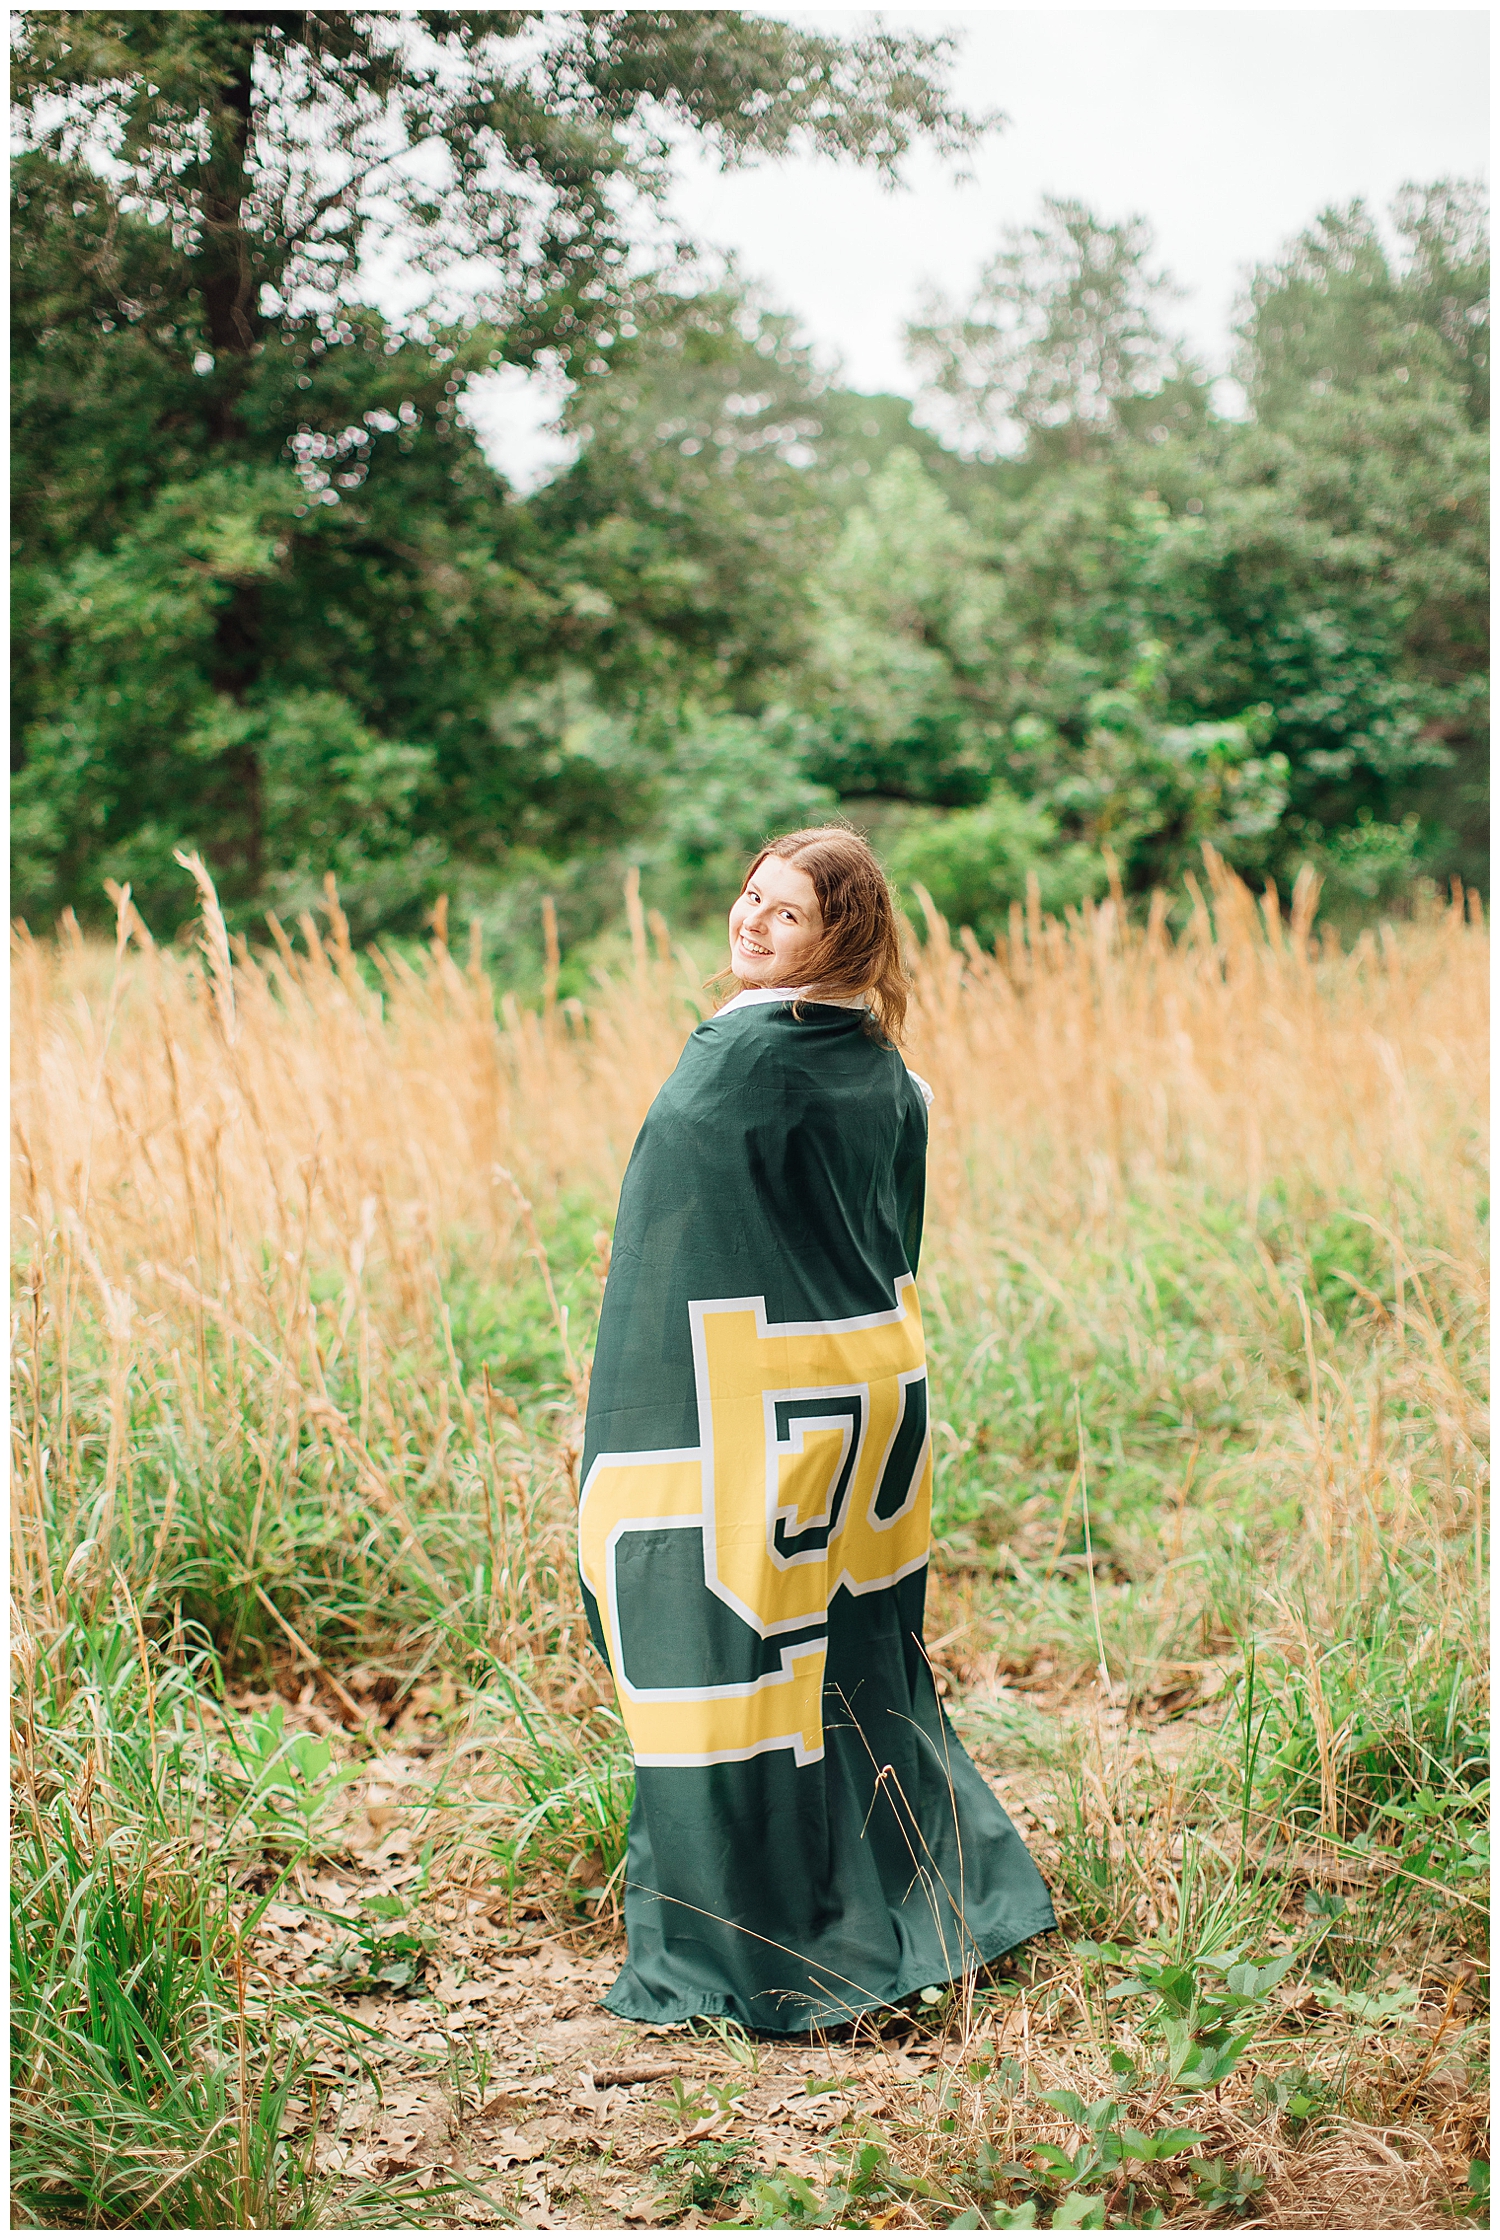 high school senior girl wrapped in Baylor university banner standing in a field